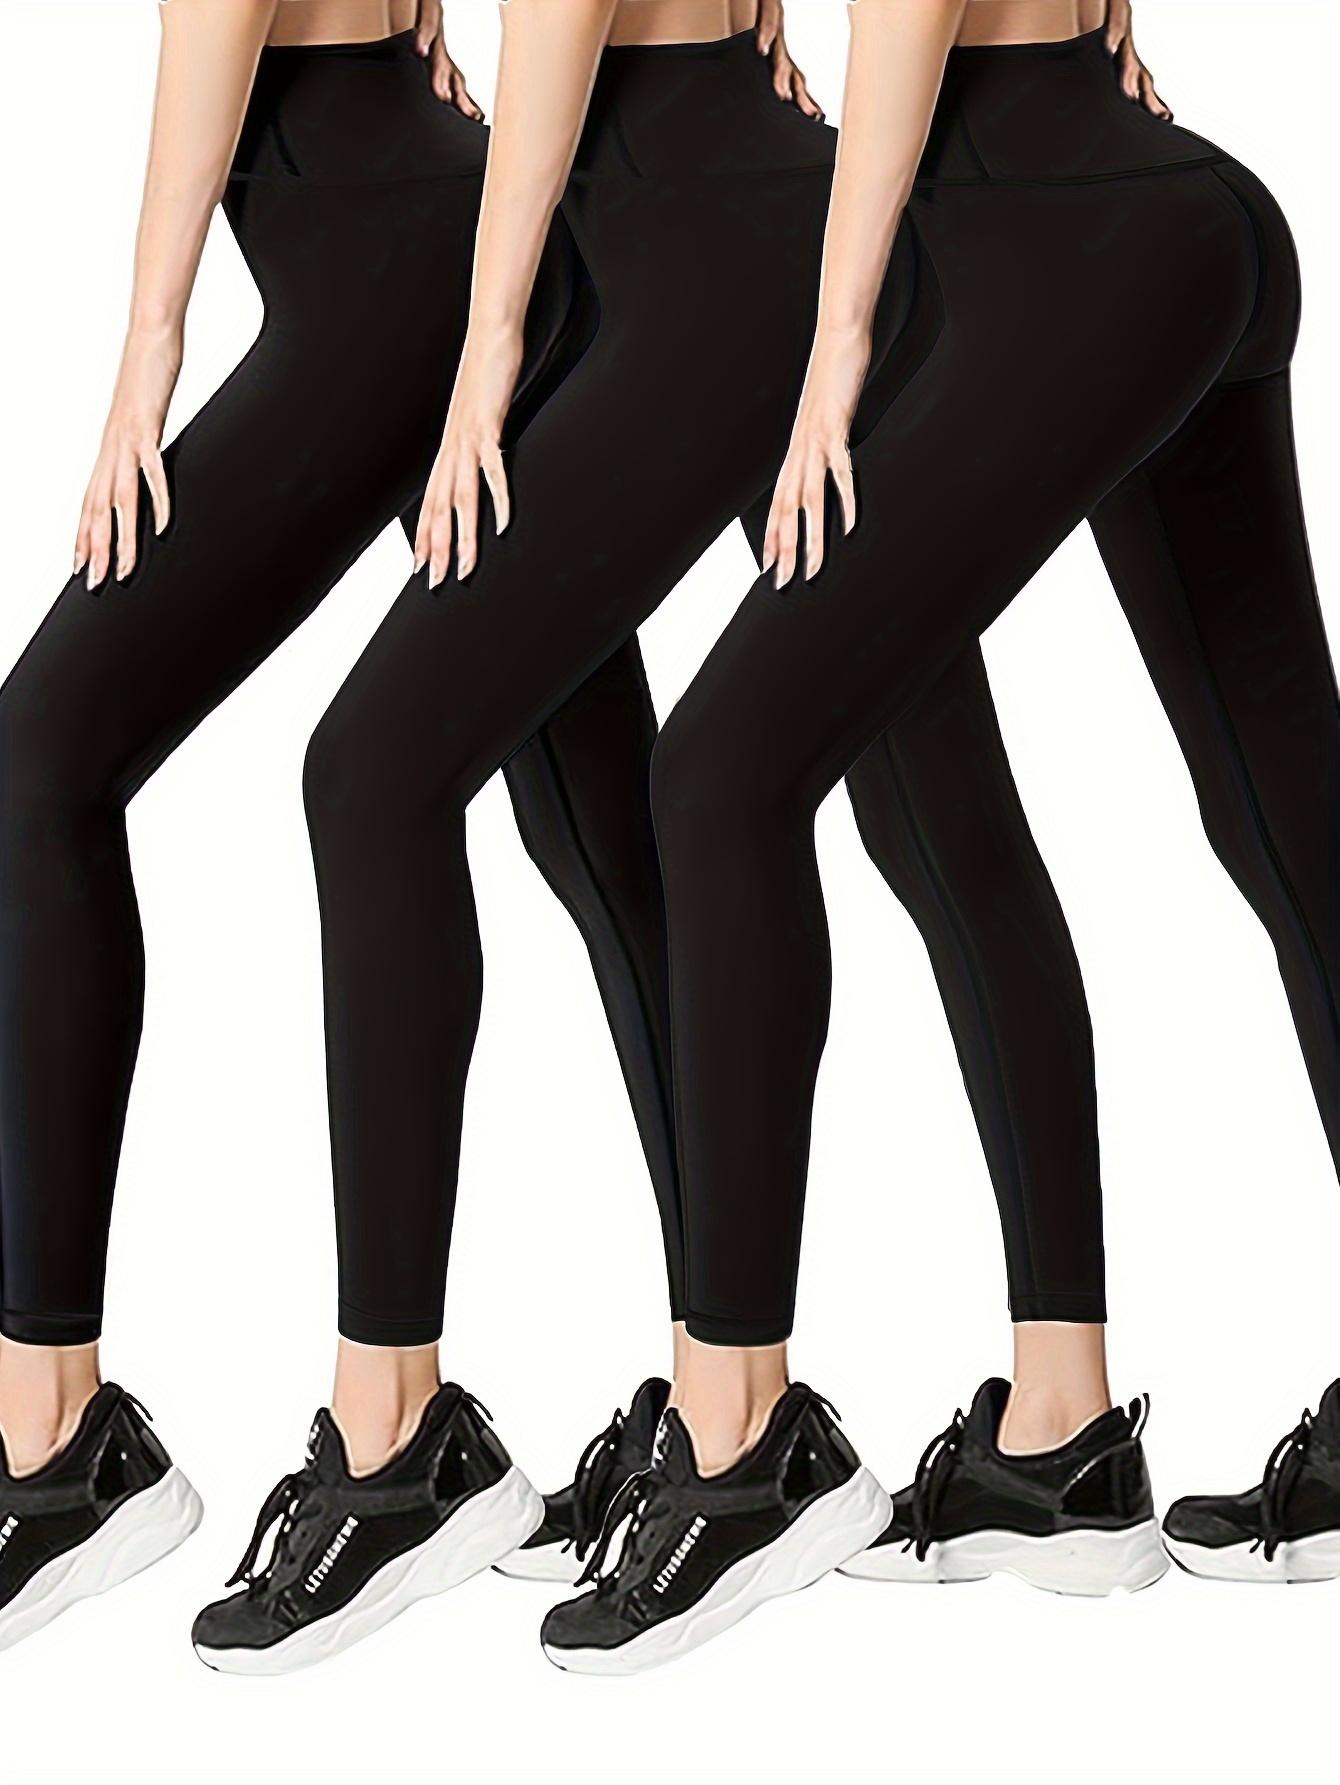 Young Beautiful Plus Size Model Wearing In Black Leggings And